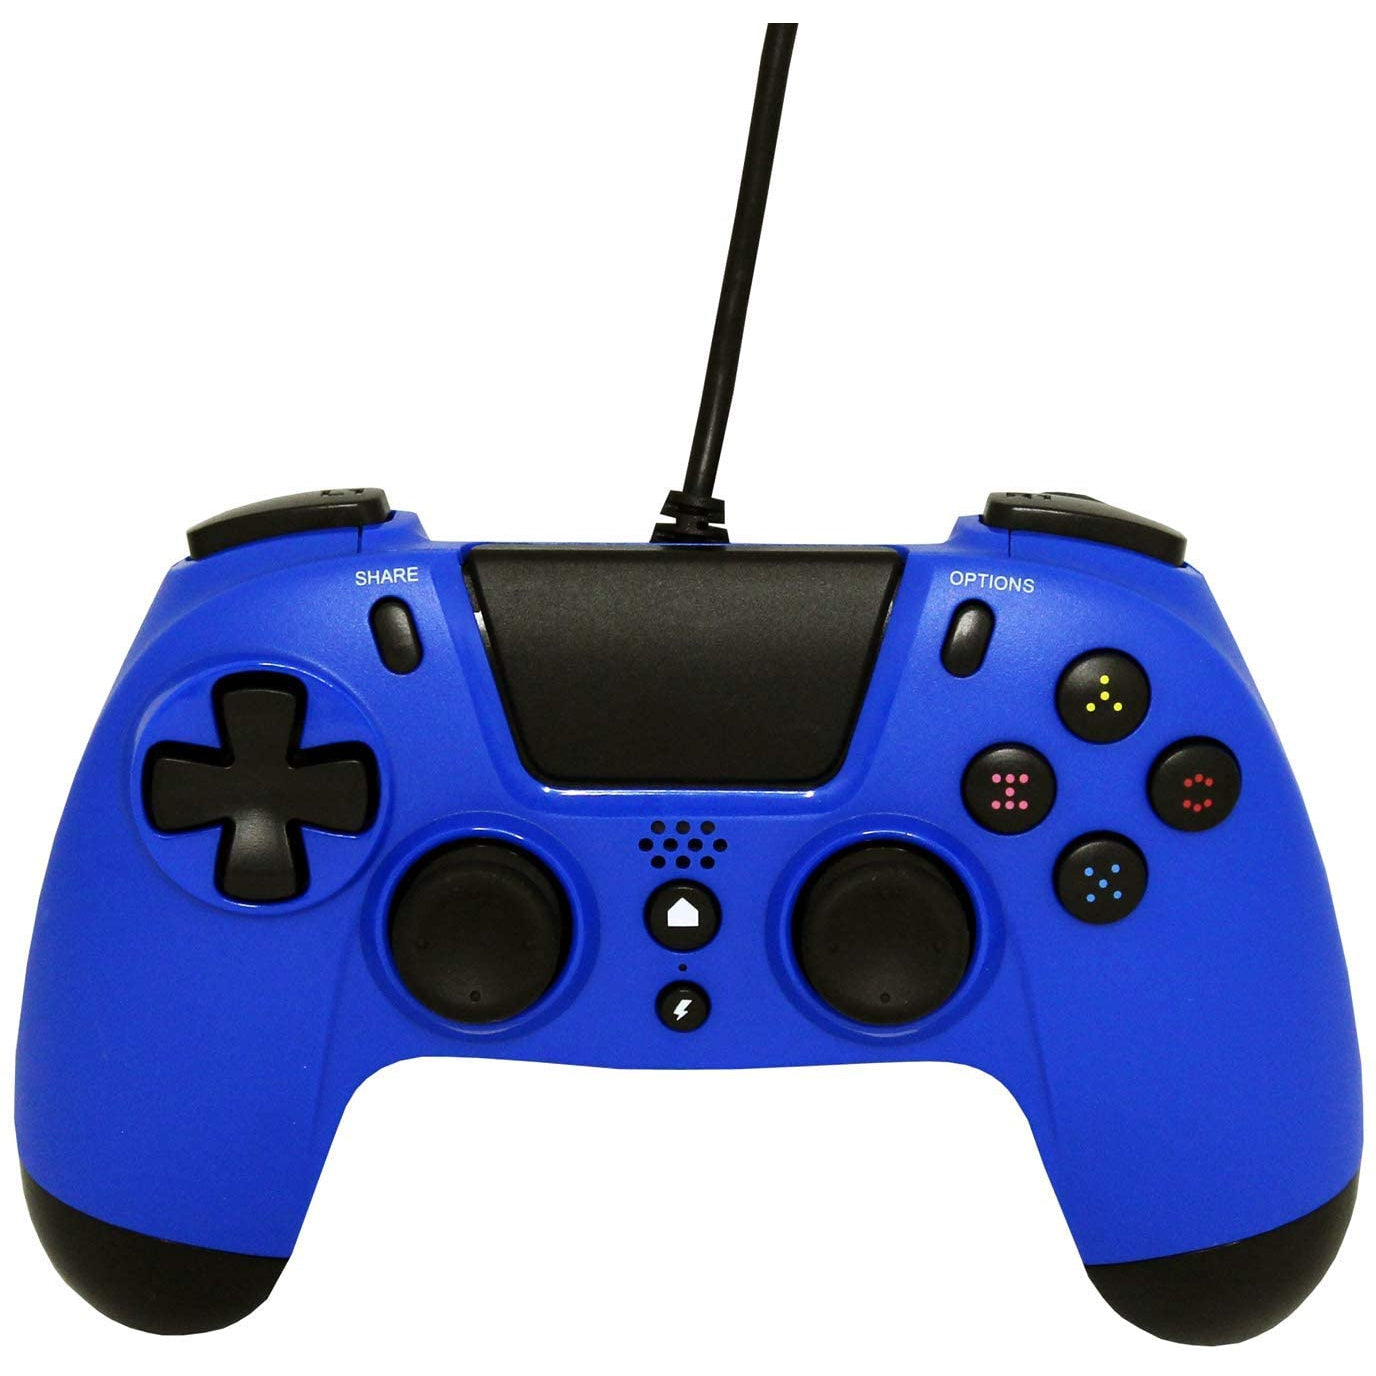 Gioteck VX-4 Wired Controller for PlayStation 4 - Blue - New